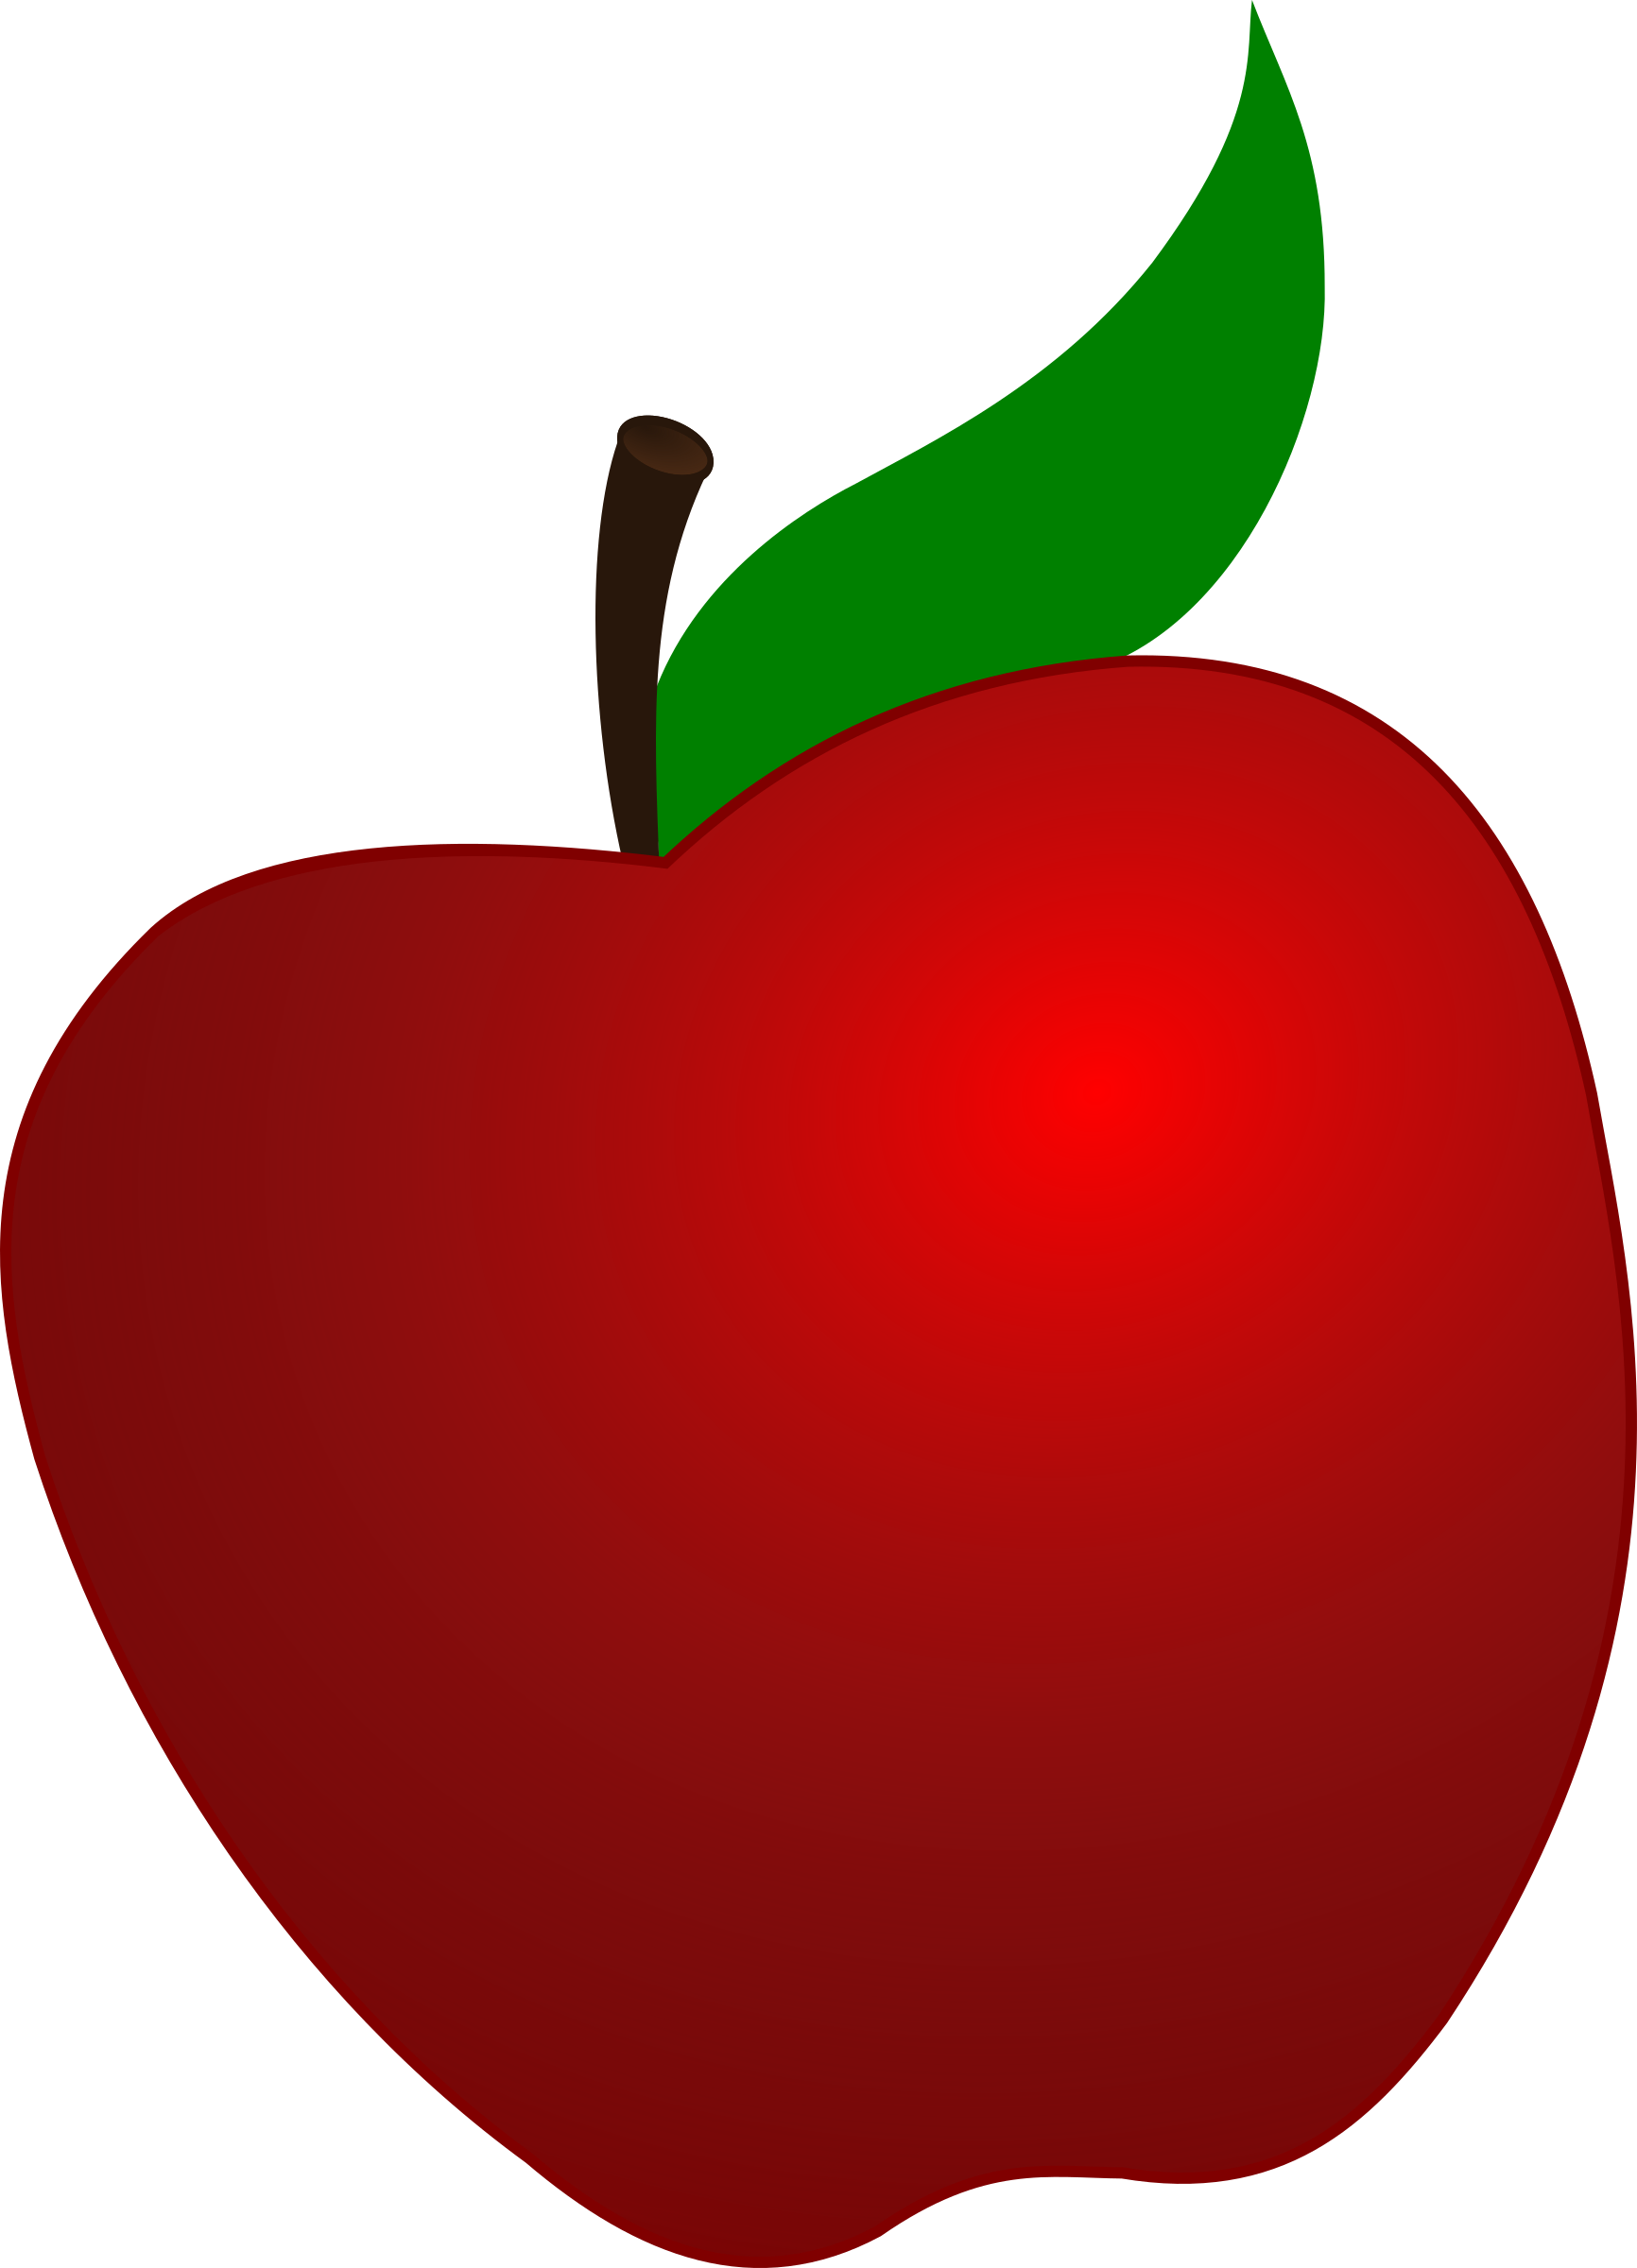 clip art images of apples - photo #36